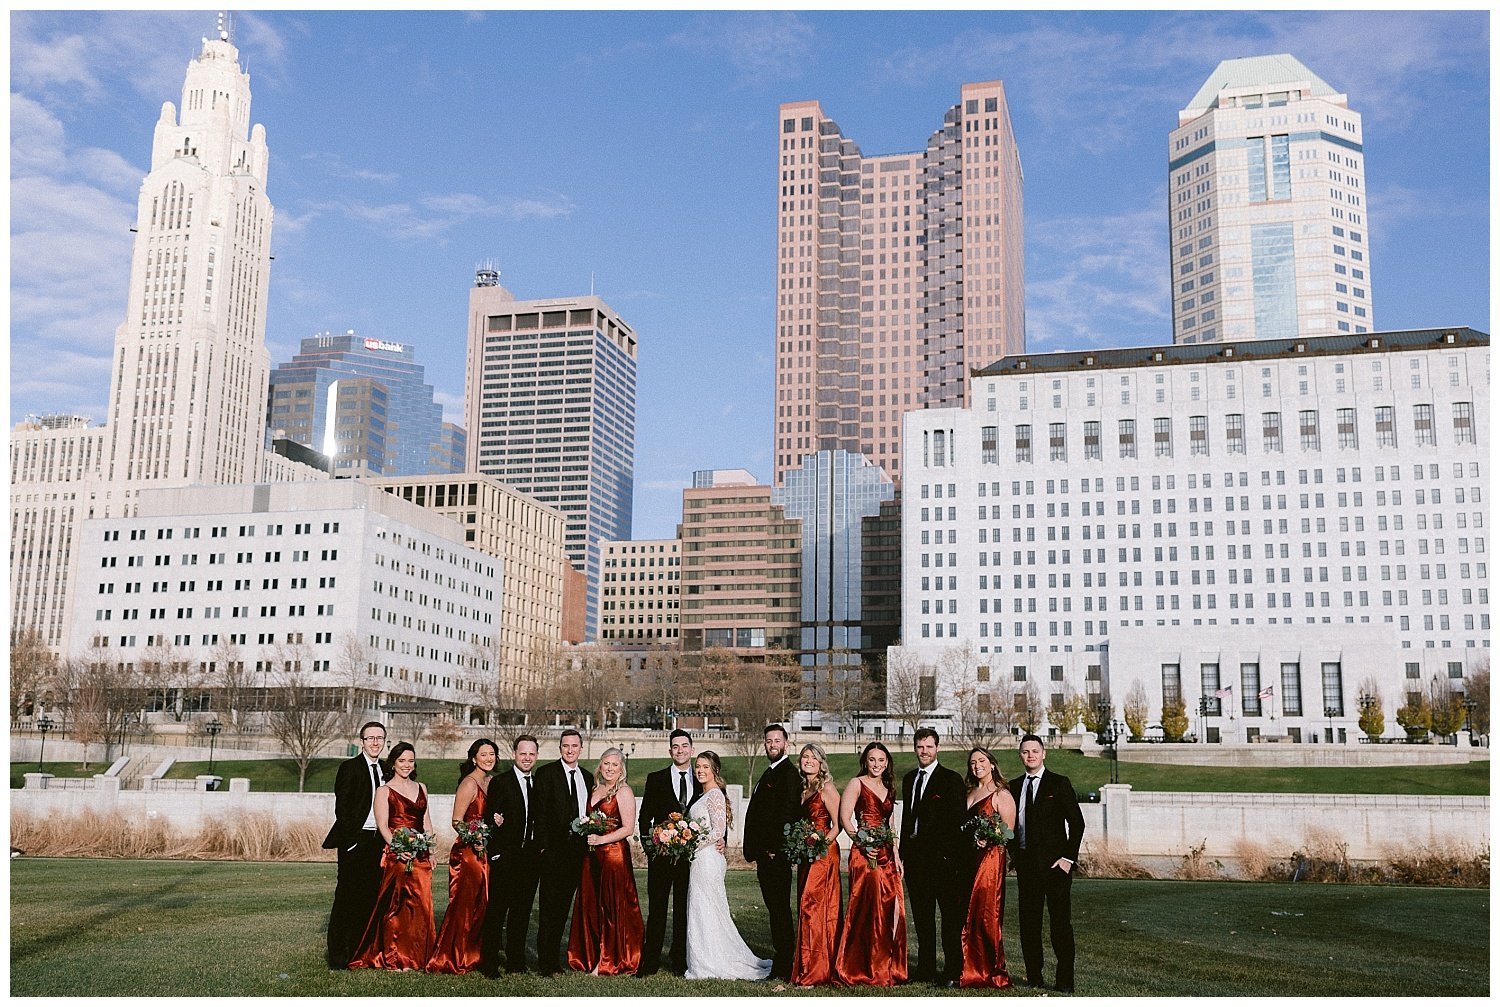 A wedding couple downtown Columbus with their bridal party.